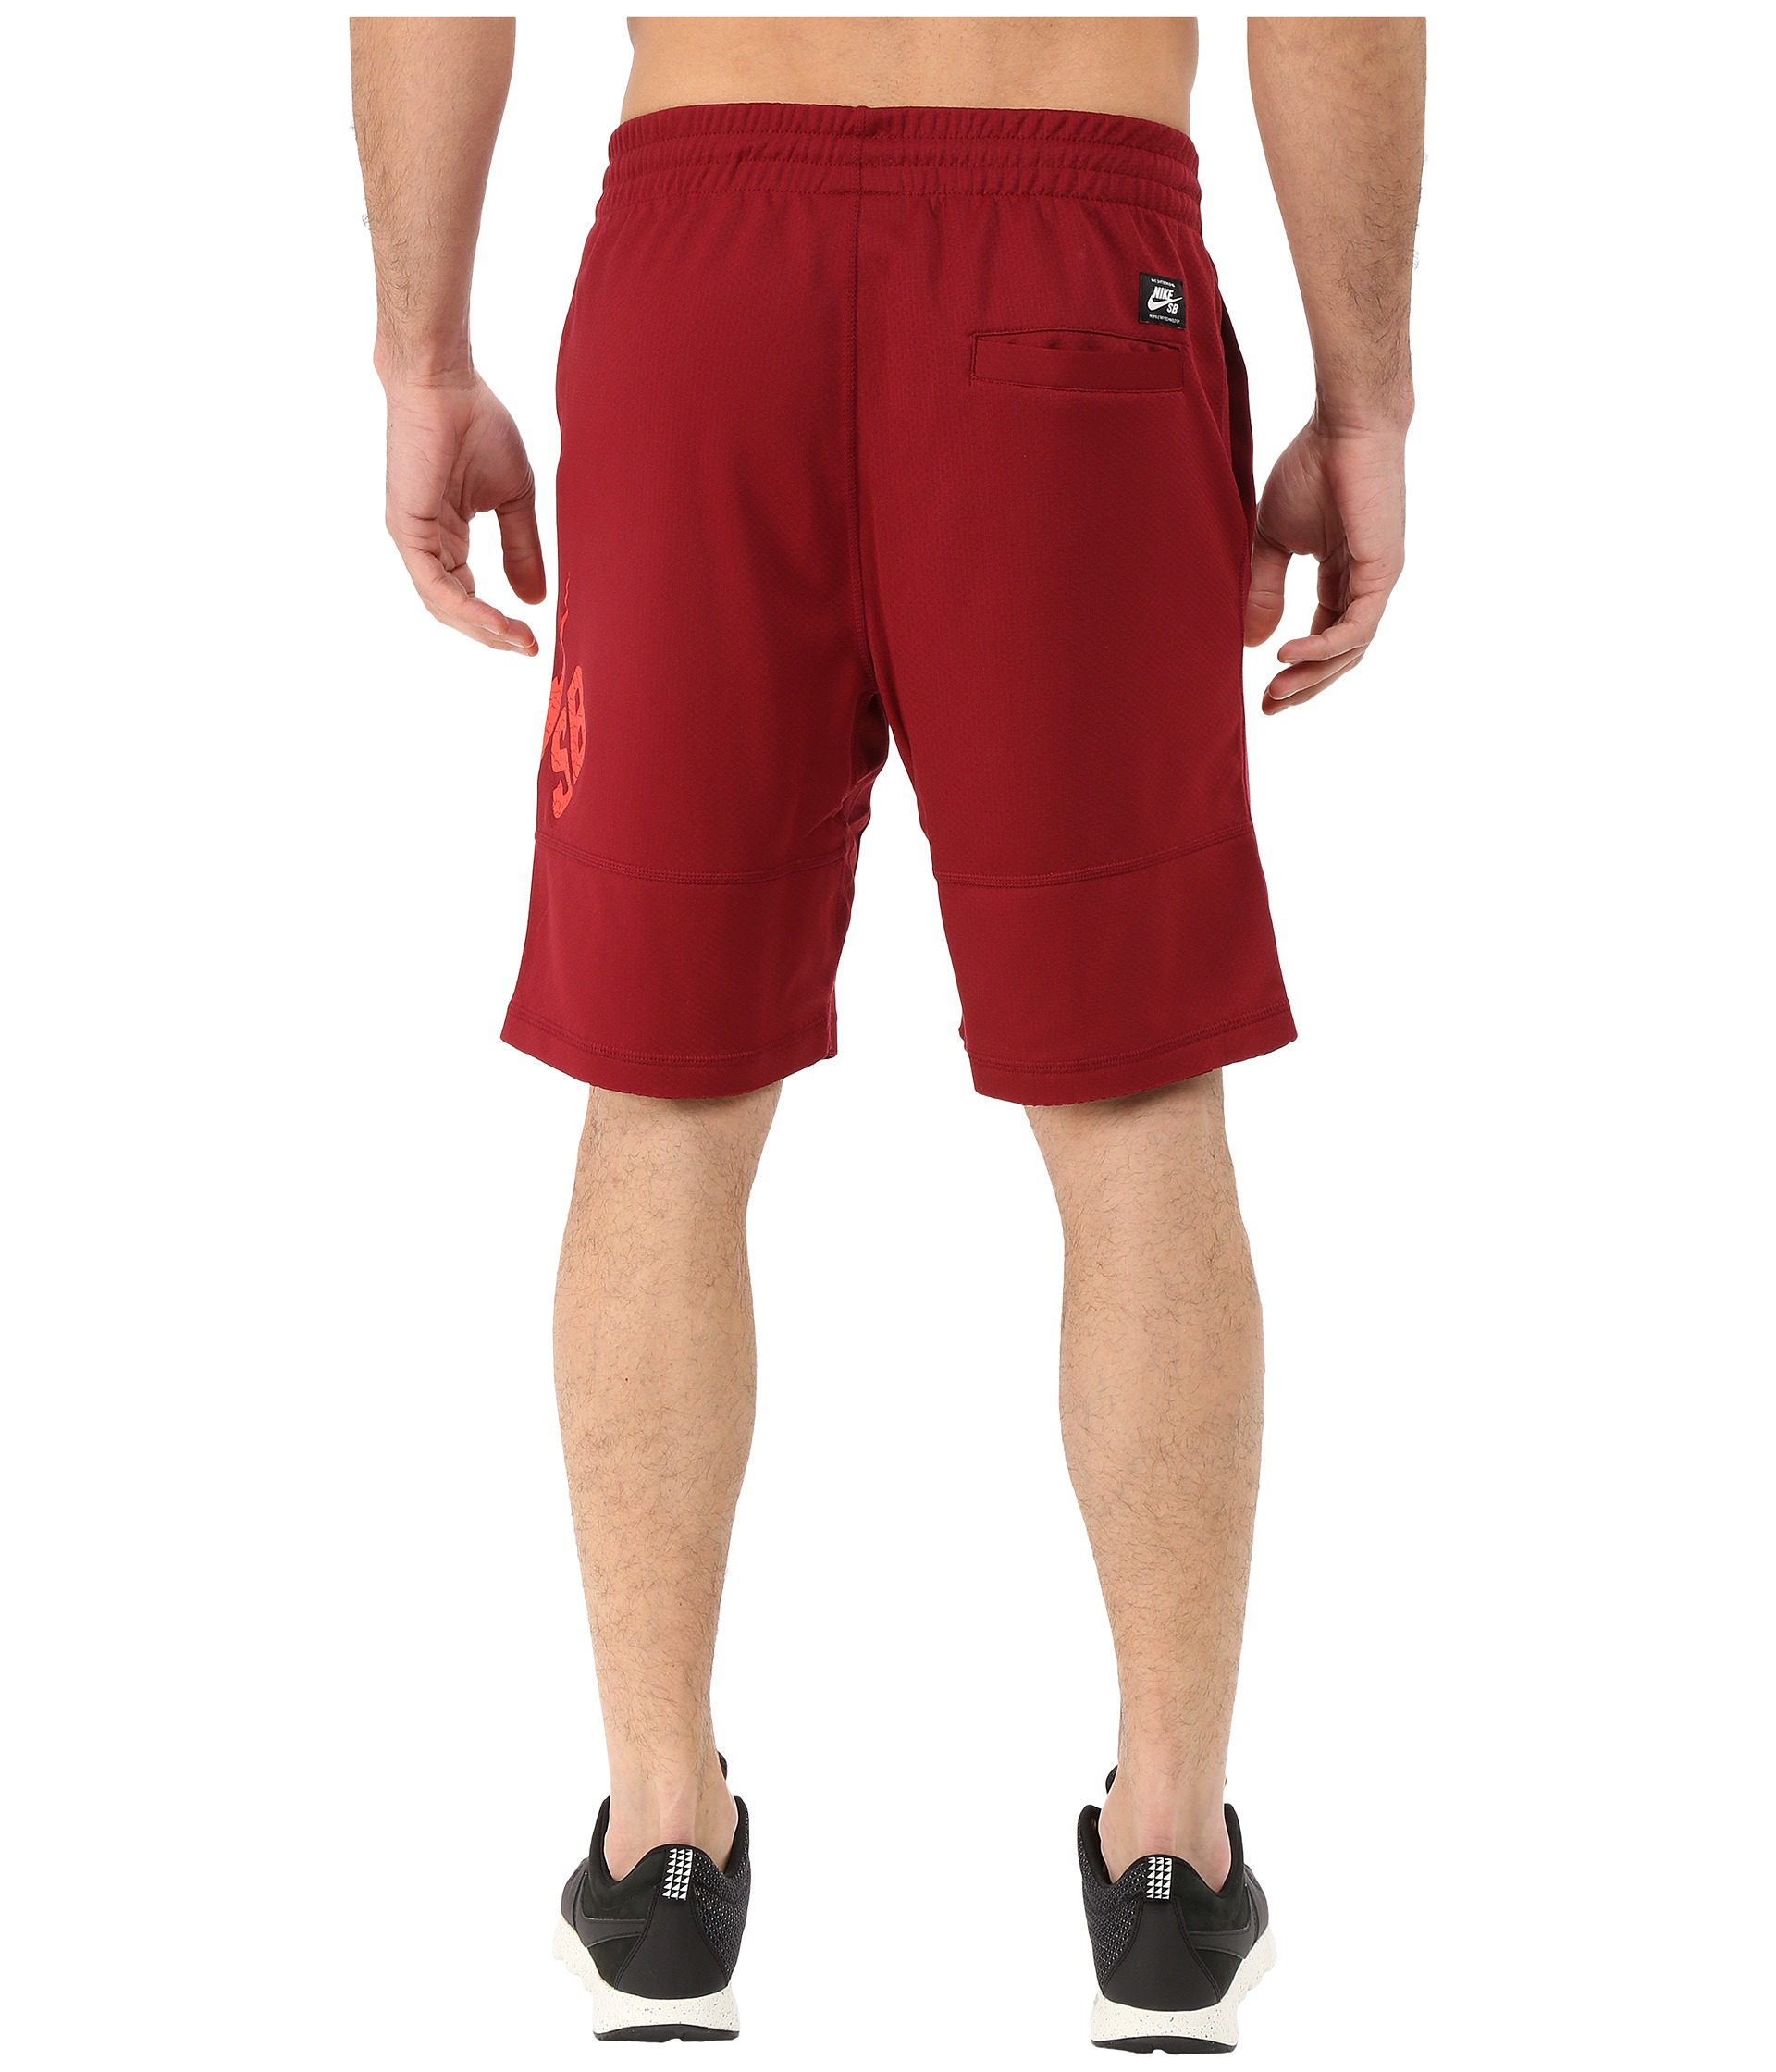 Nike Sb Dri-fit Sunday Short in Red for Men - Lyst